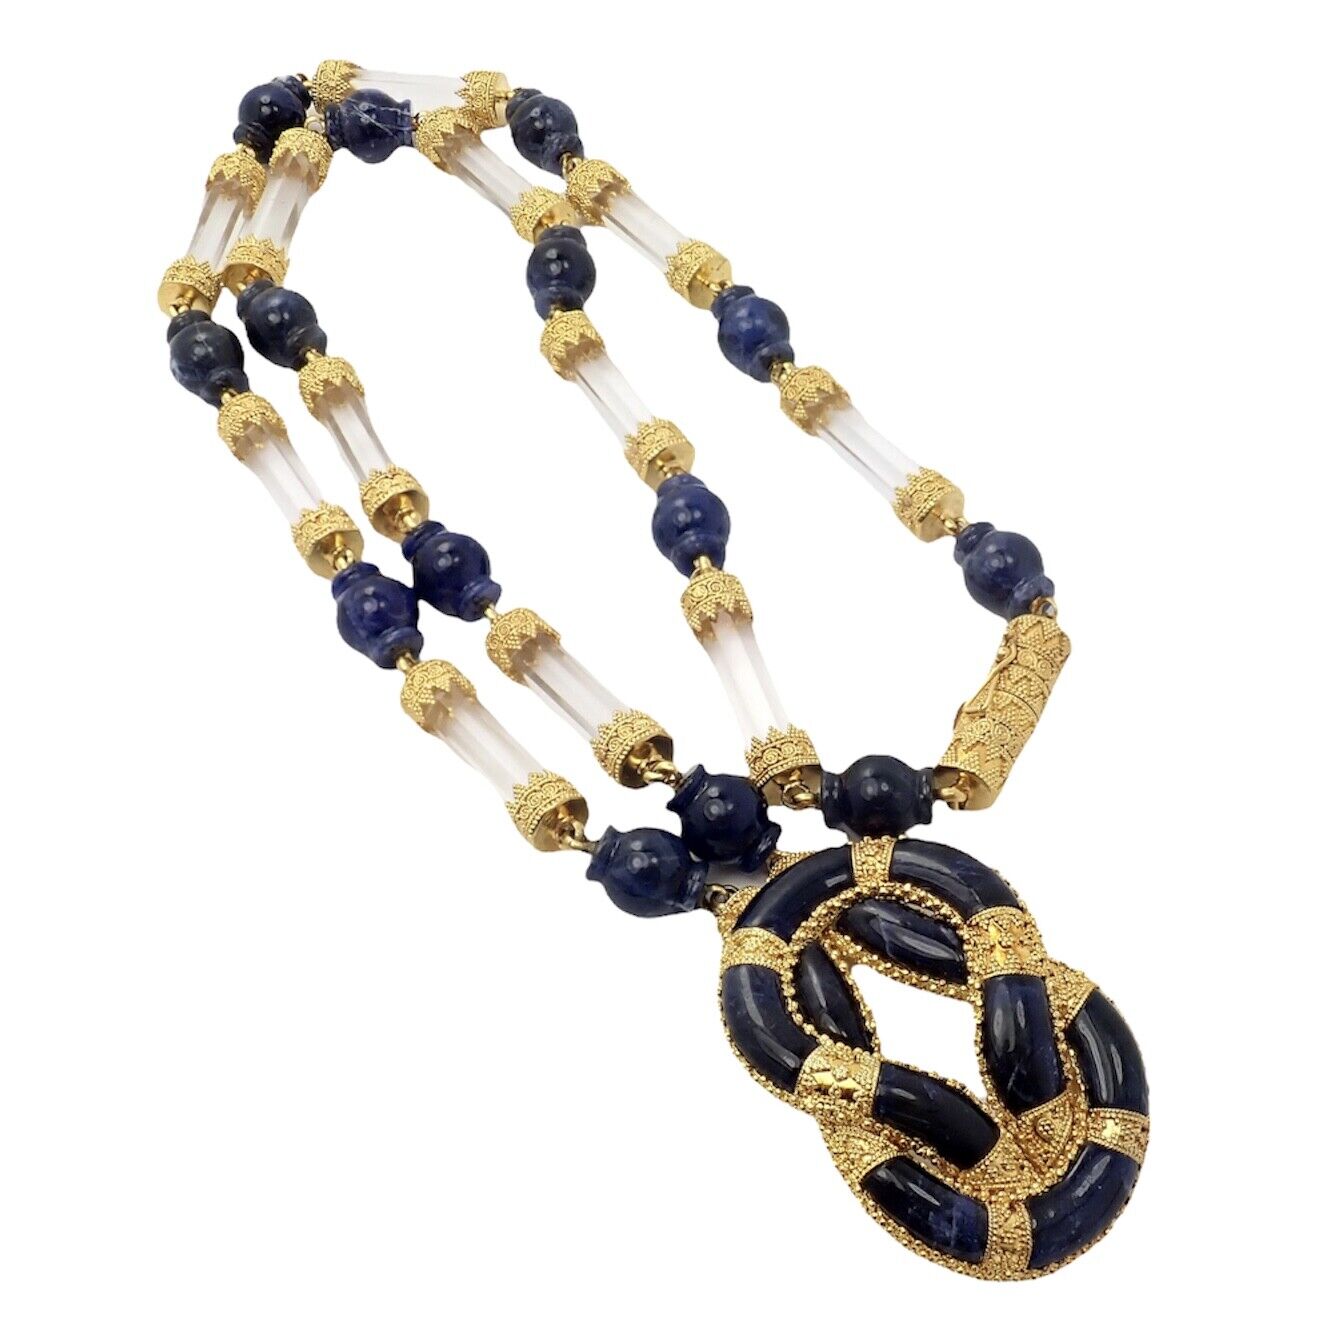 Ilias Lalaounis Jewelry & Watches:Fine Jewelry:Necklaces & Pendants Rare! Authentic Ilias Lalaounis 18k Gold Sodalite Crystal Hercules Knot Necklace